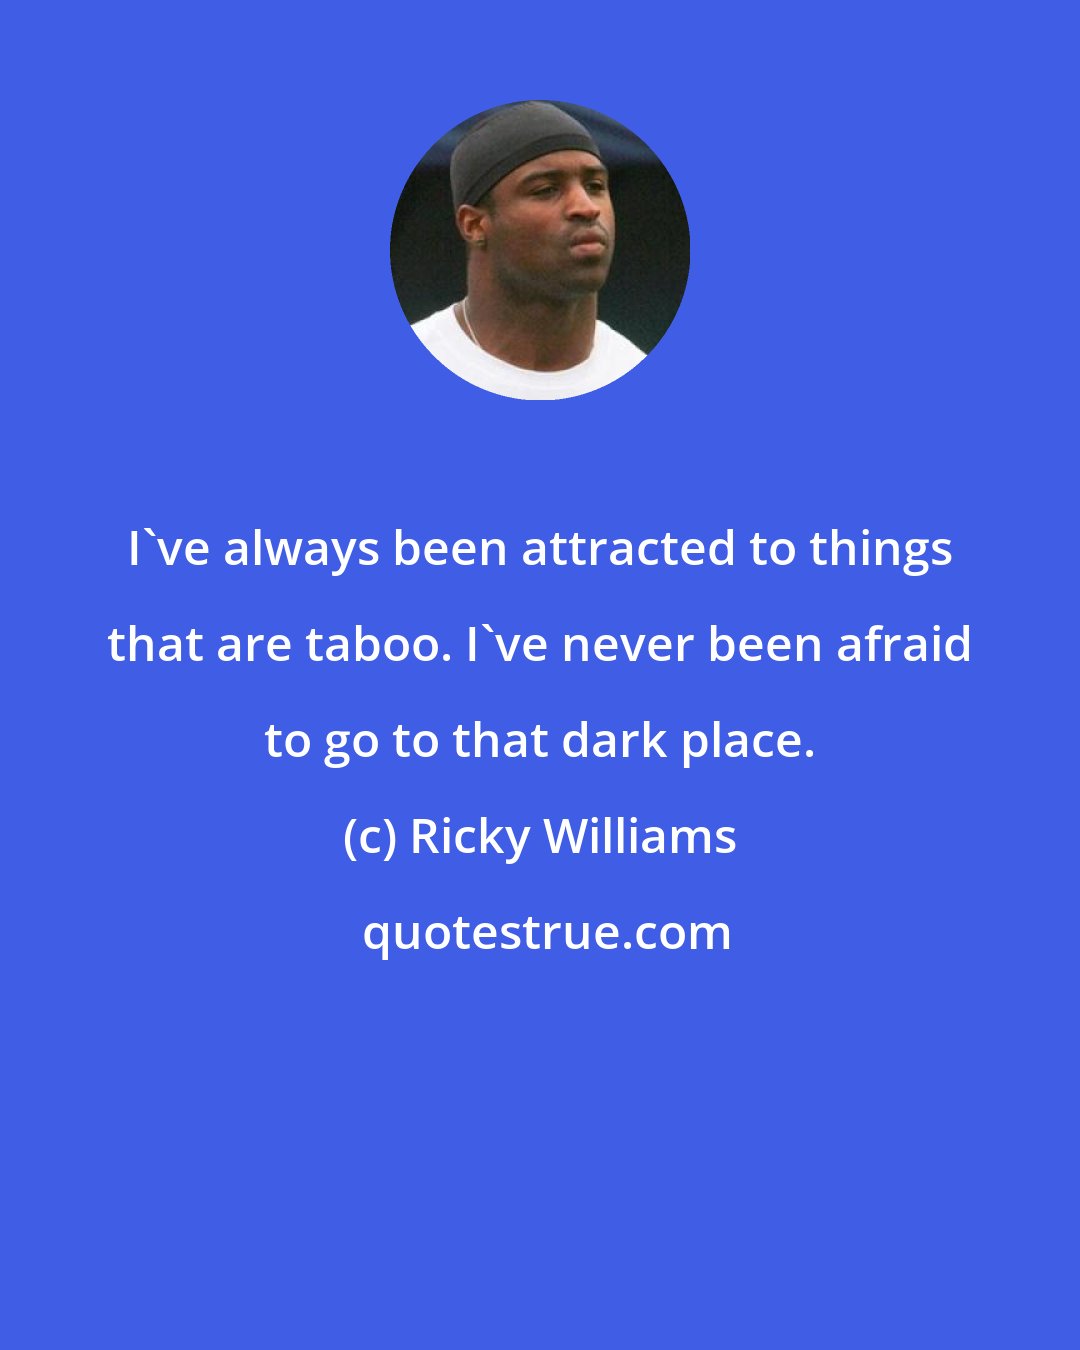 Ricky Williams: I've always been attracted to things that are taboo. I've never been afraid to go to that dark place.